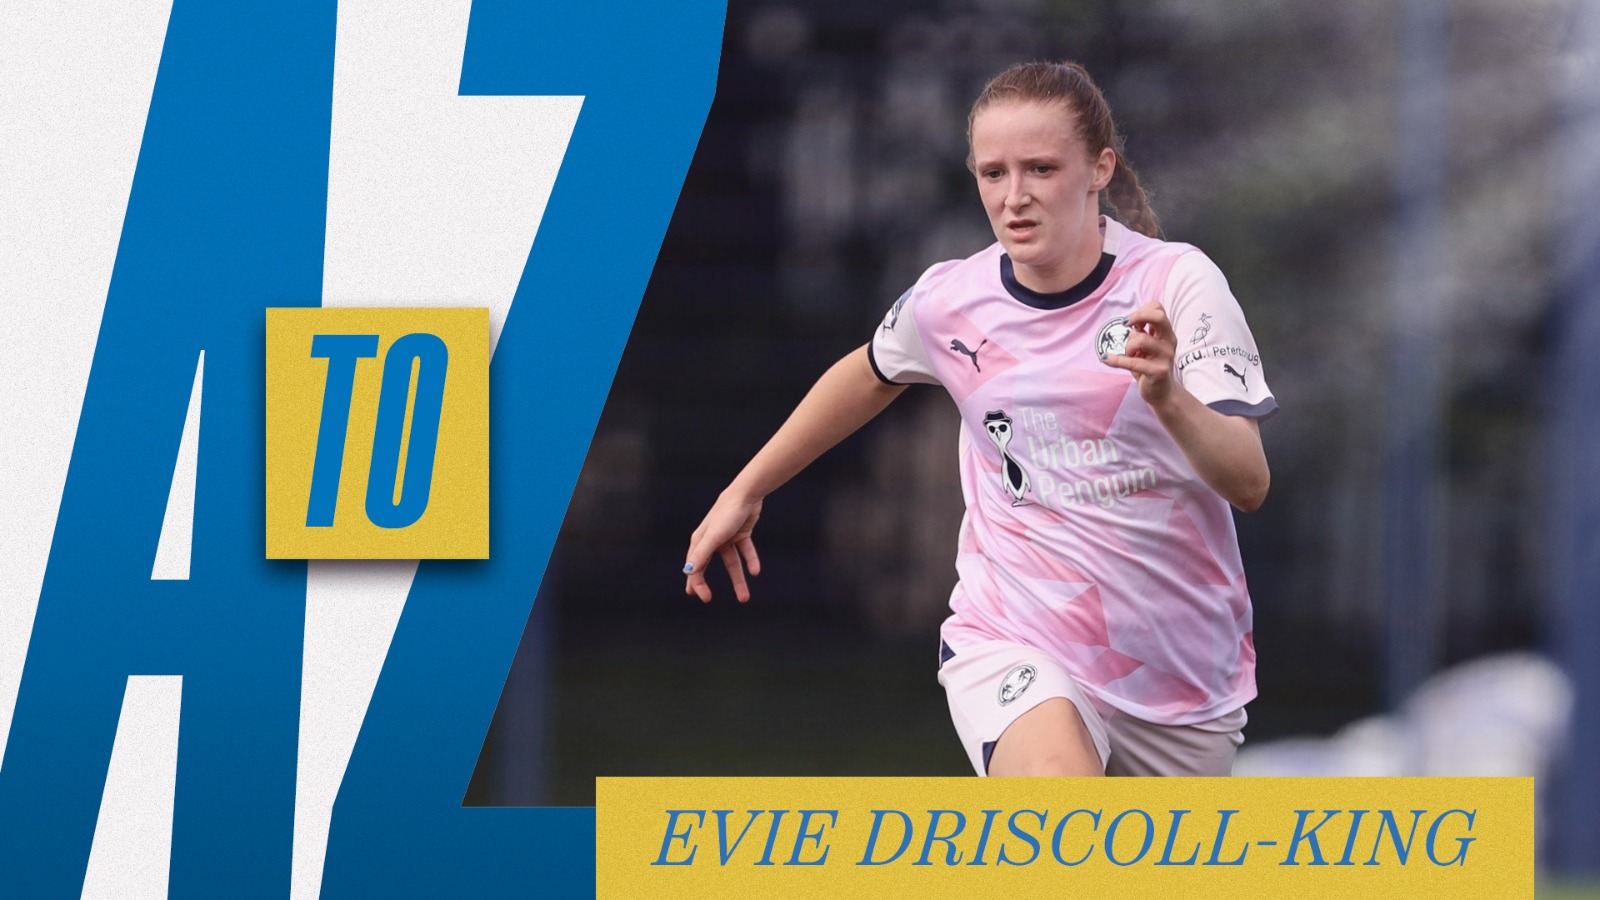 Evie Driscoll-King